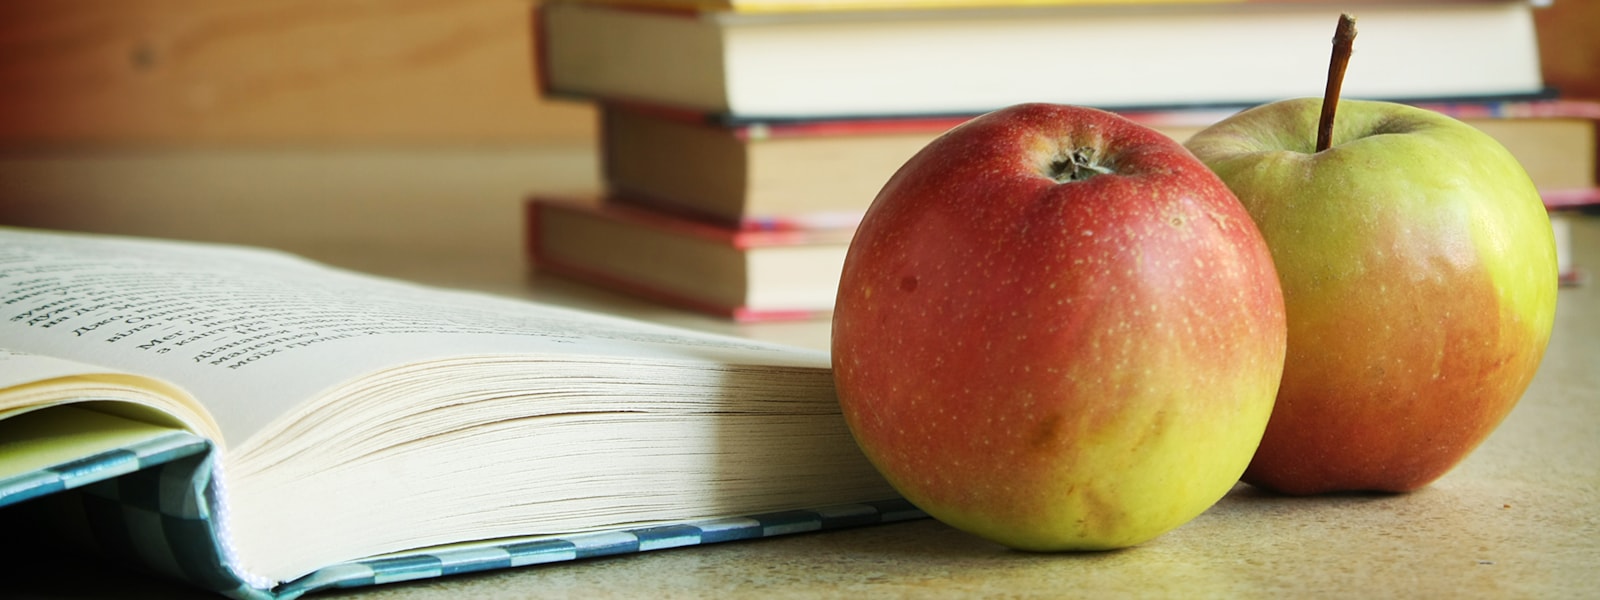 Open Book and Apples